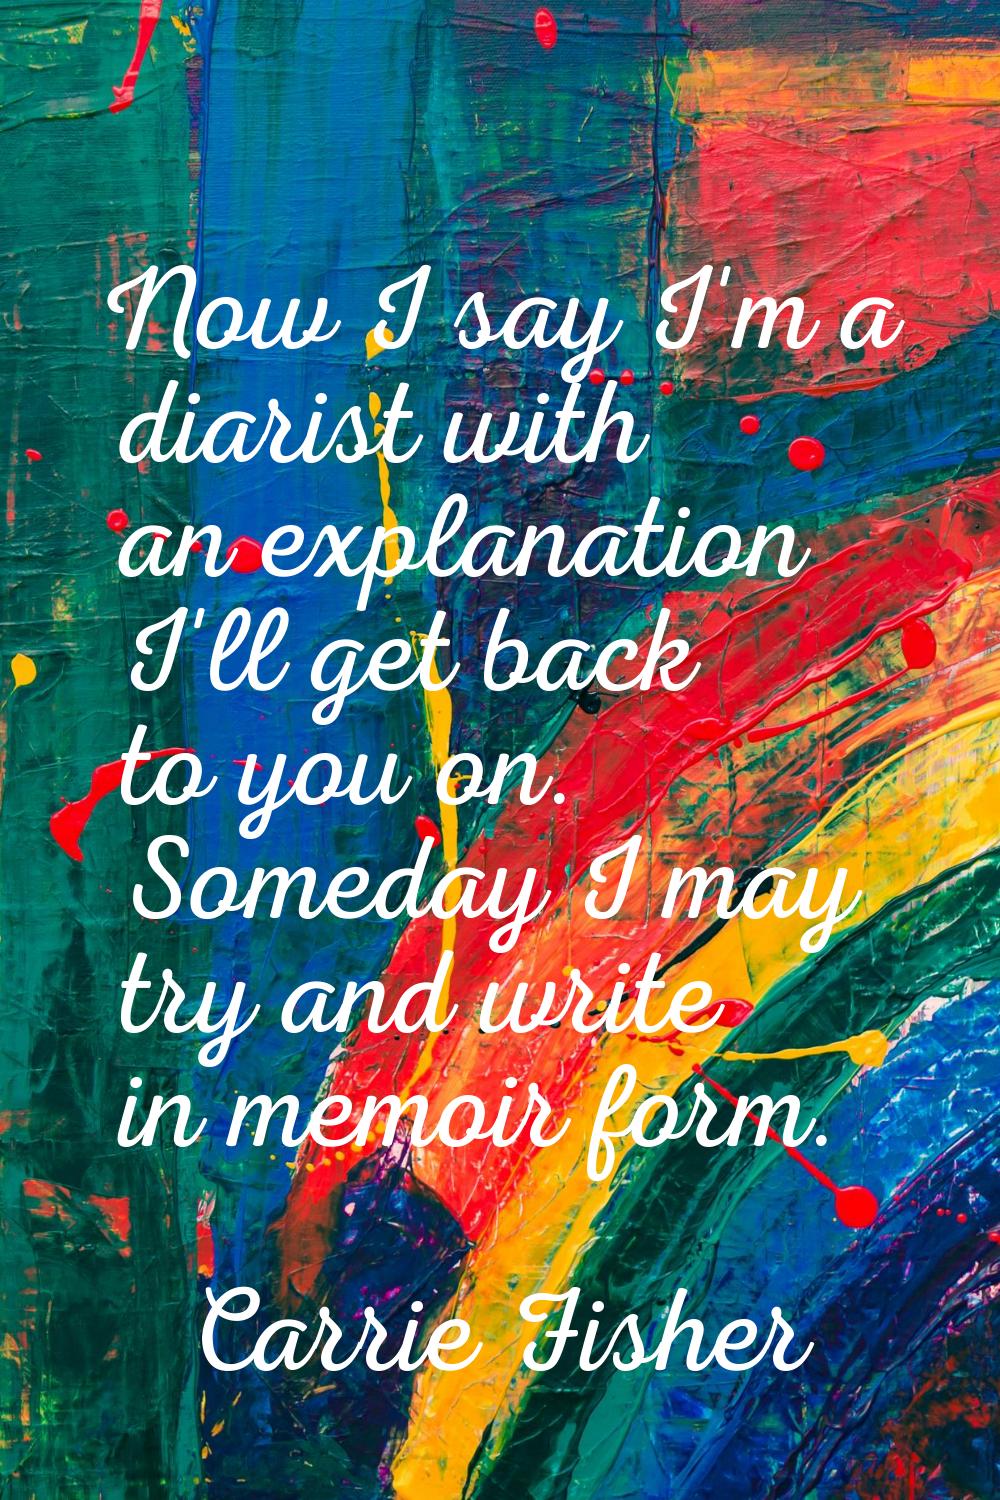 Now I say I'm a diarist with an explanation I'll get back to you on. Someday I may try and write in